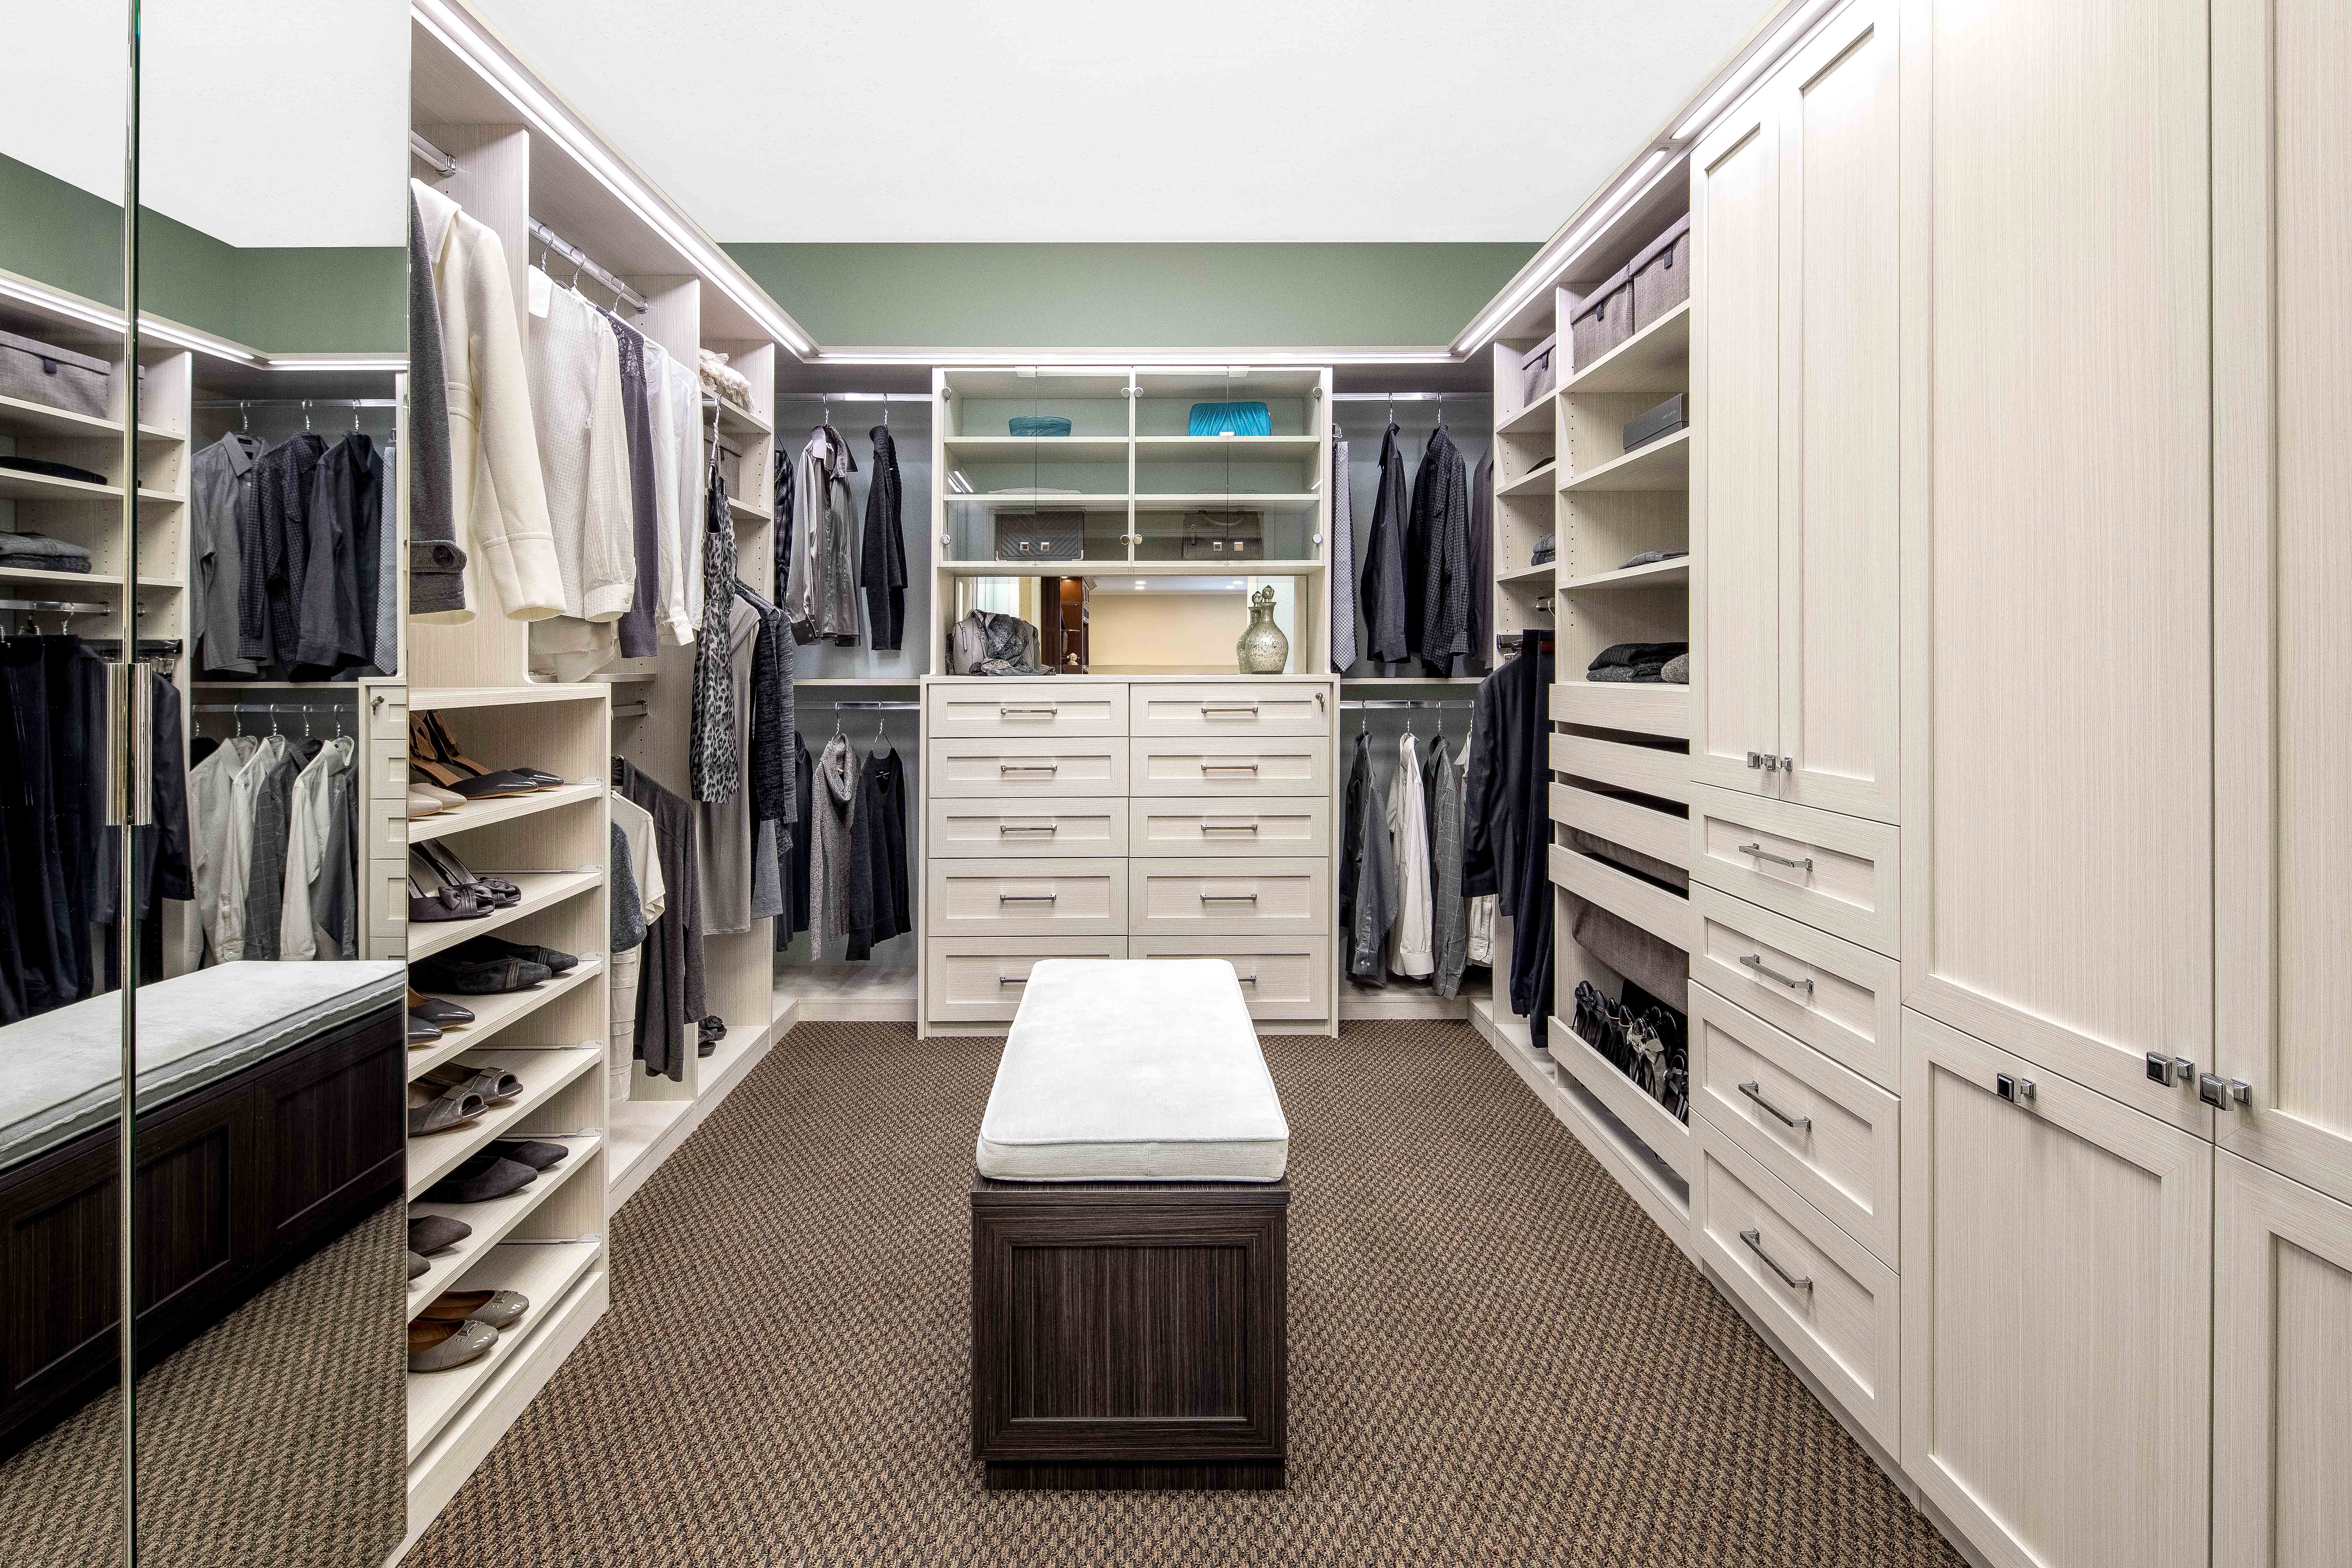 Deluxe walk-in closet at Valet Custom Cabinets & Closets in Campbell, CA